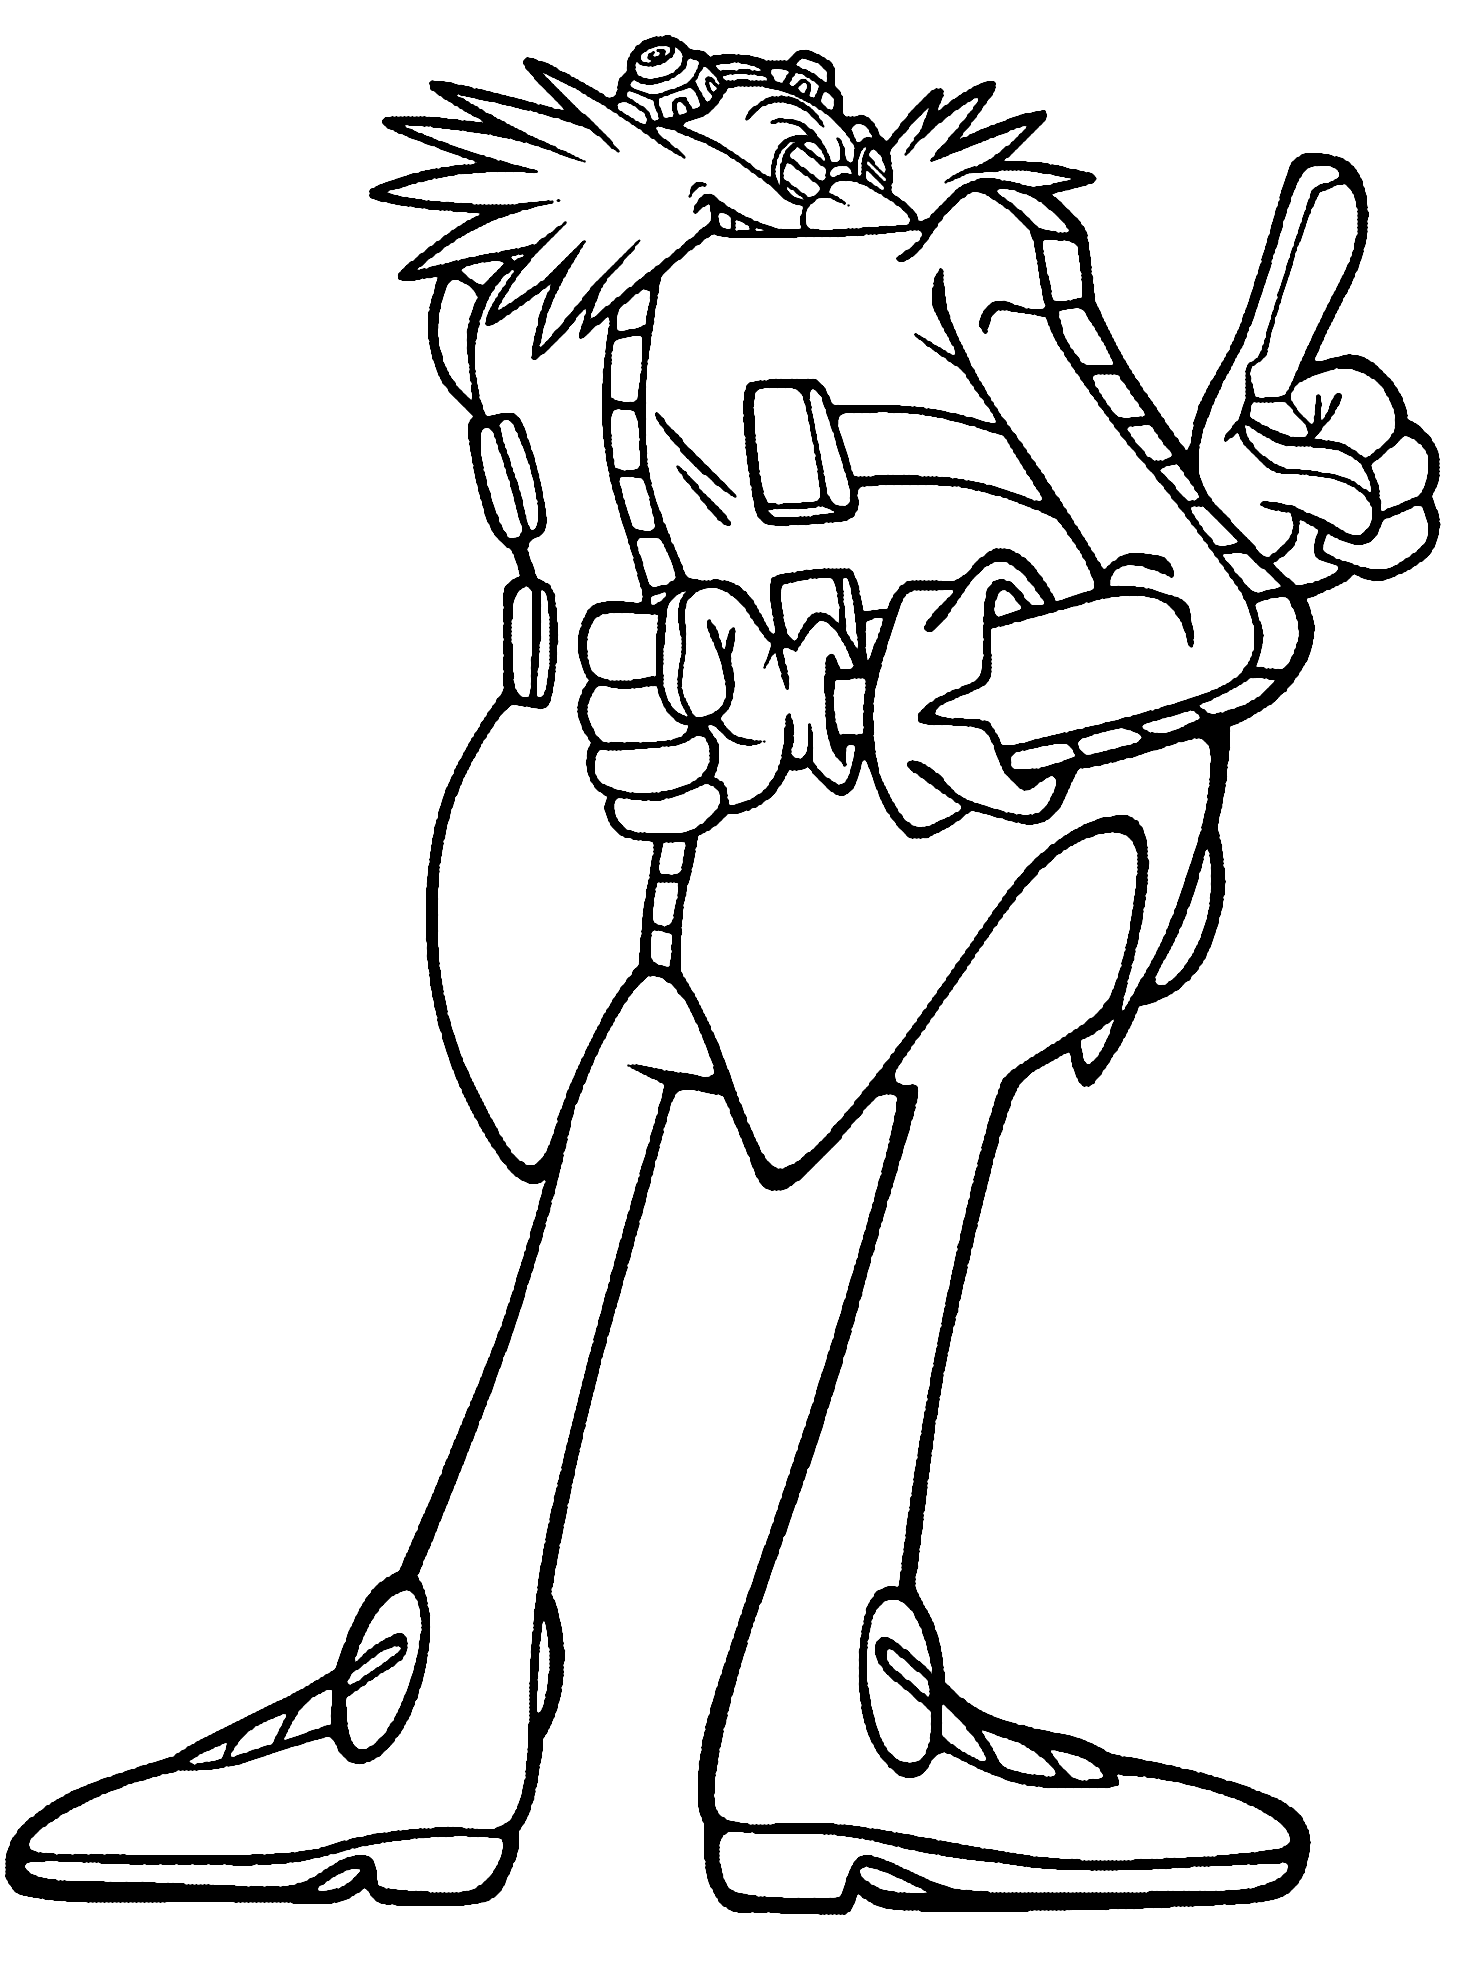 Coloring page - Dr. Eggman